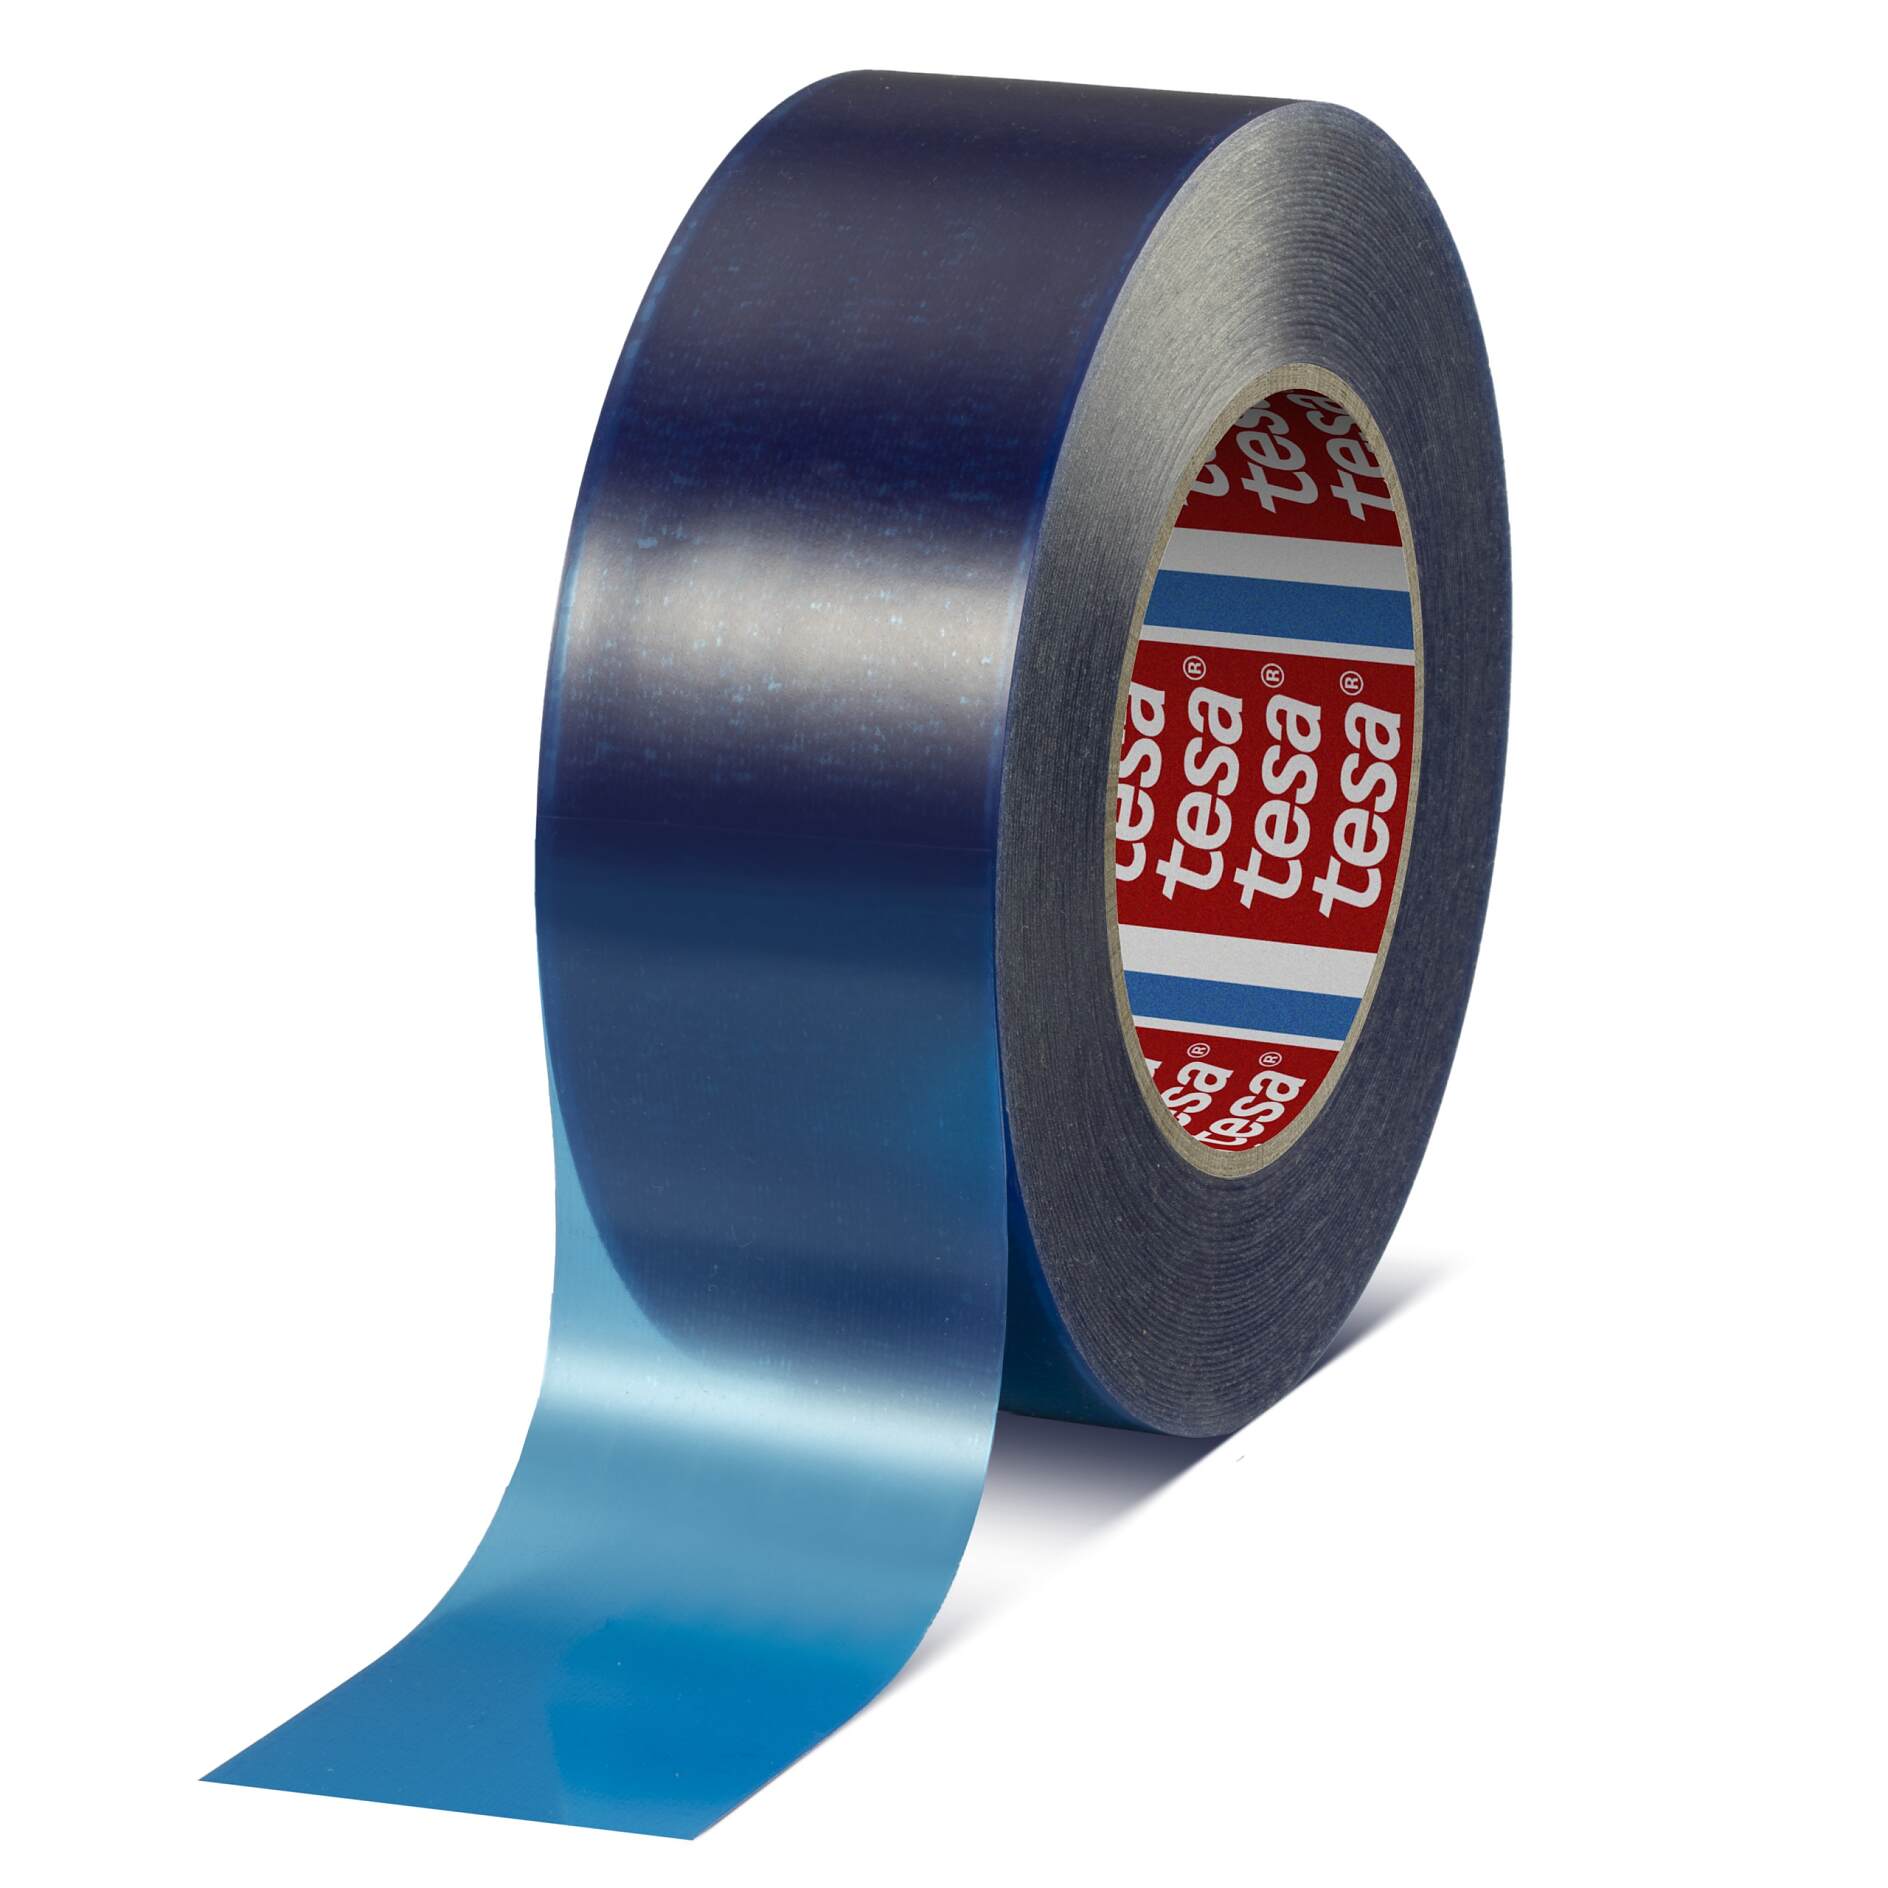 Hook and loop tape - flexible and robust in any situation